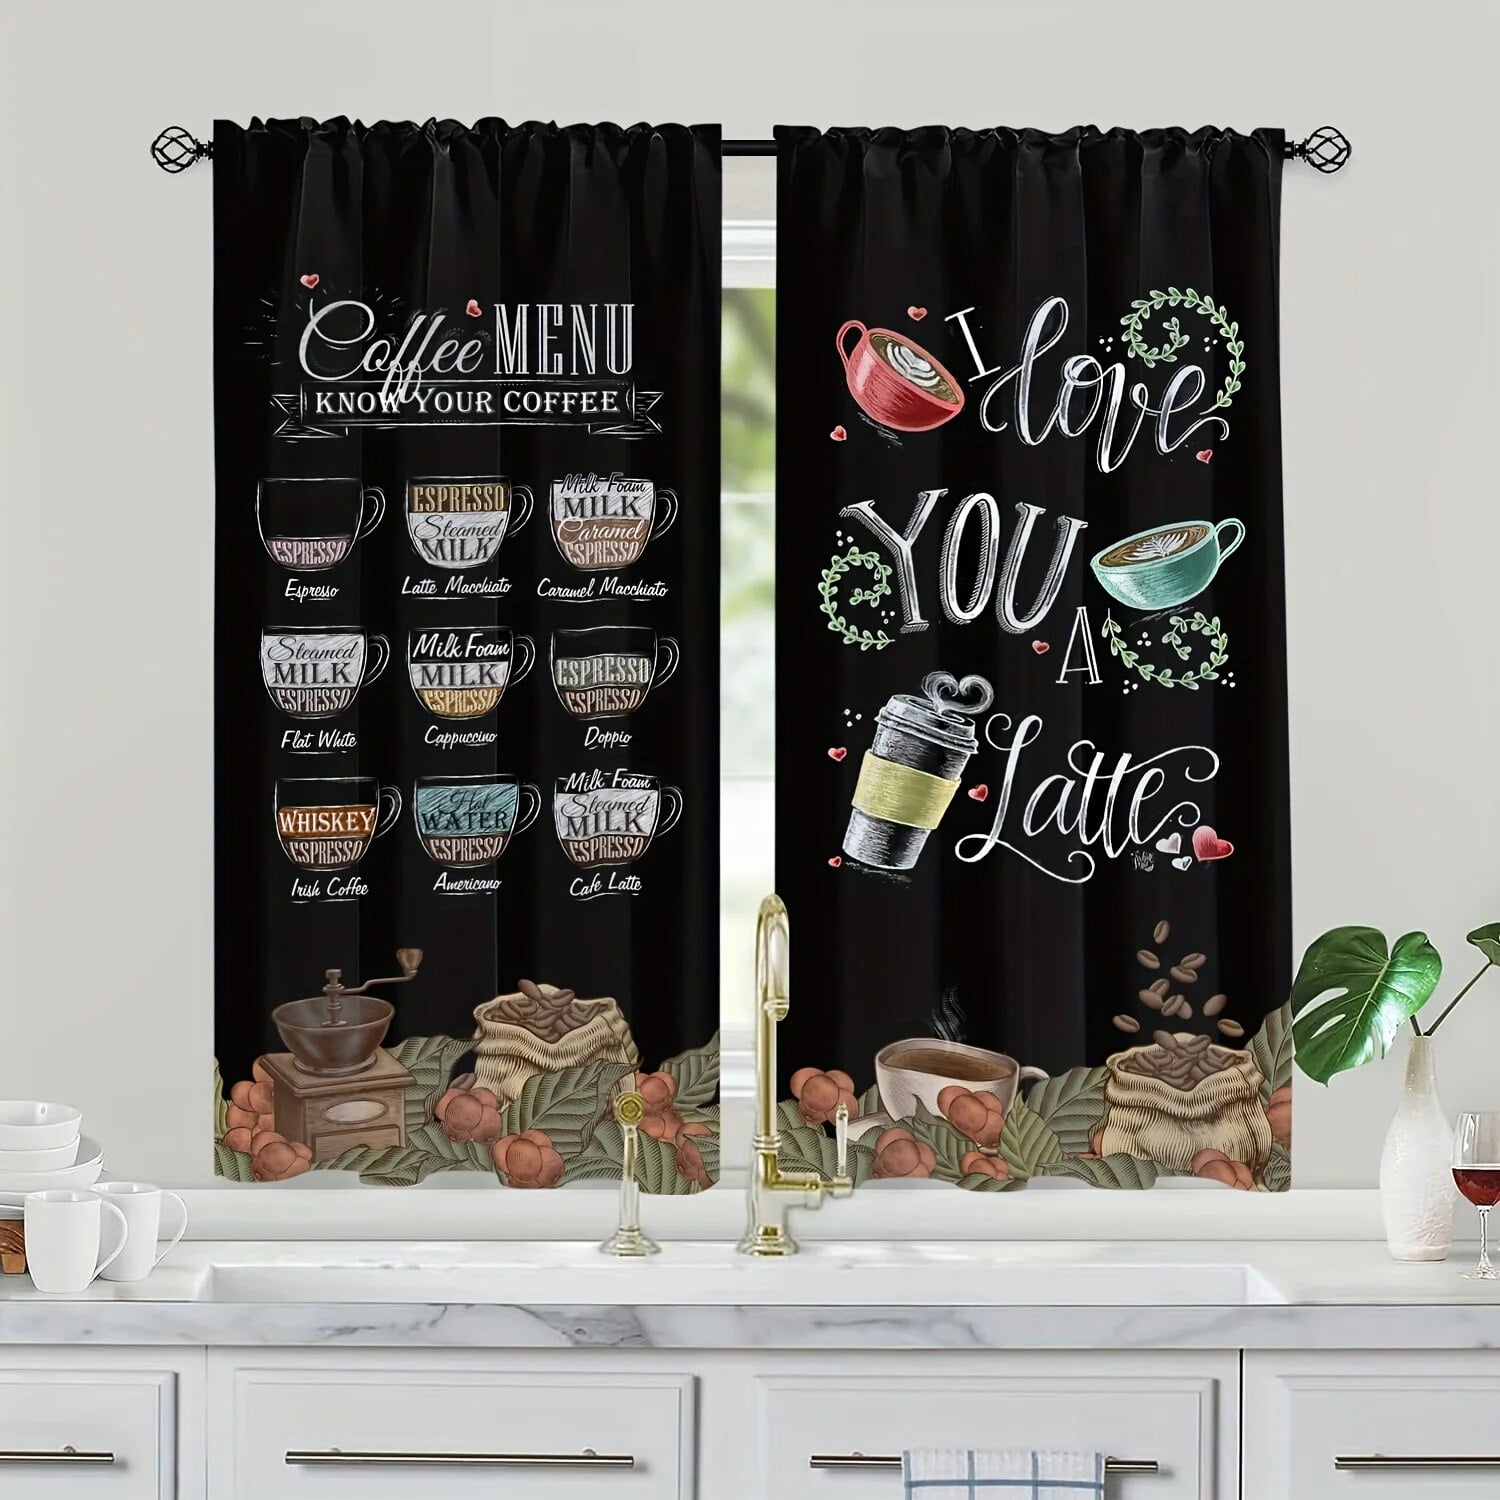 2pcs Cafe Curtain Coffee Pattern Home Kitchen Curtains Semi Blackout ...